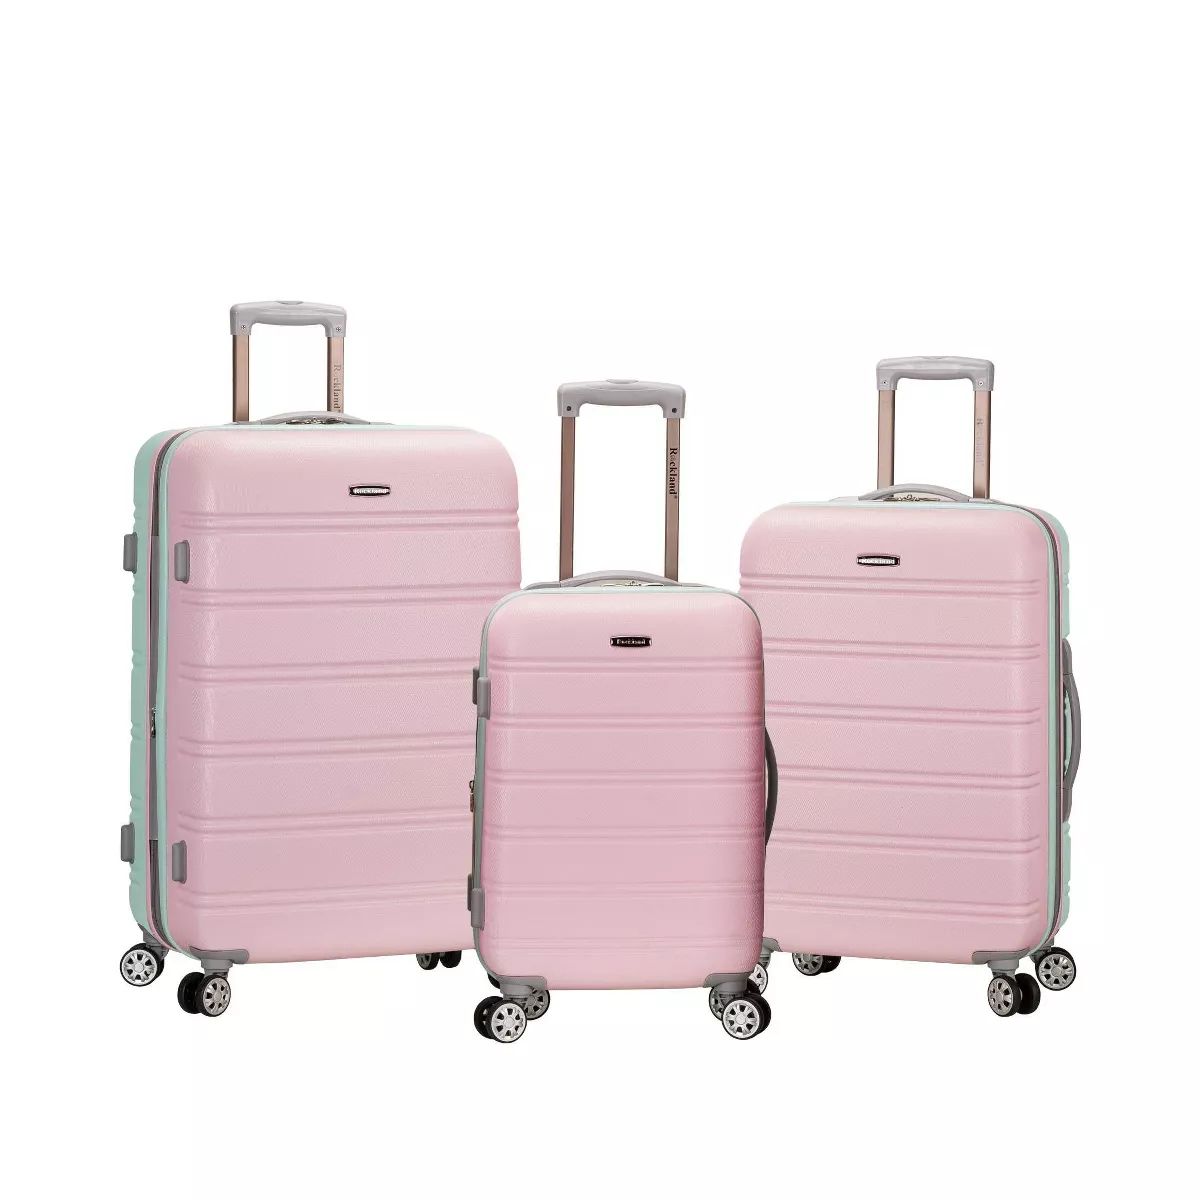 Rockland Melbourne 3pc Expandable ABS Hardside Checked Spinner Luggage Set - Pink/Mint | Target